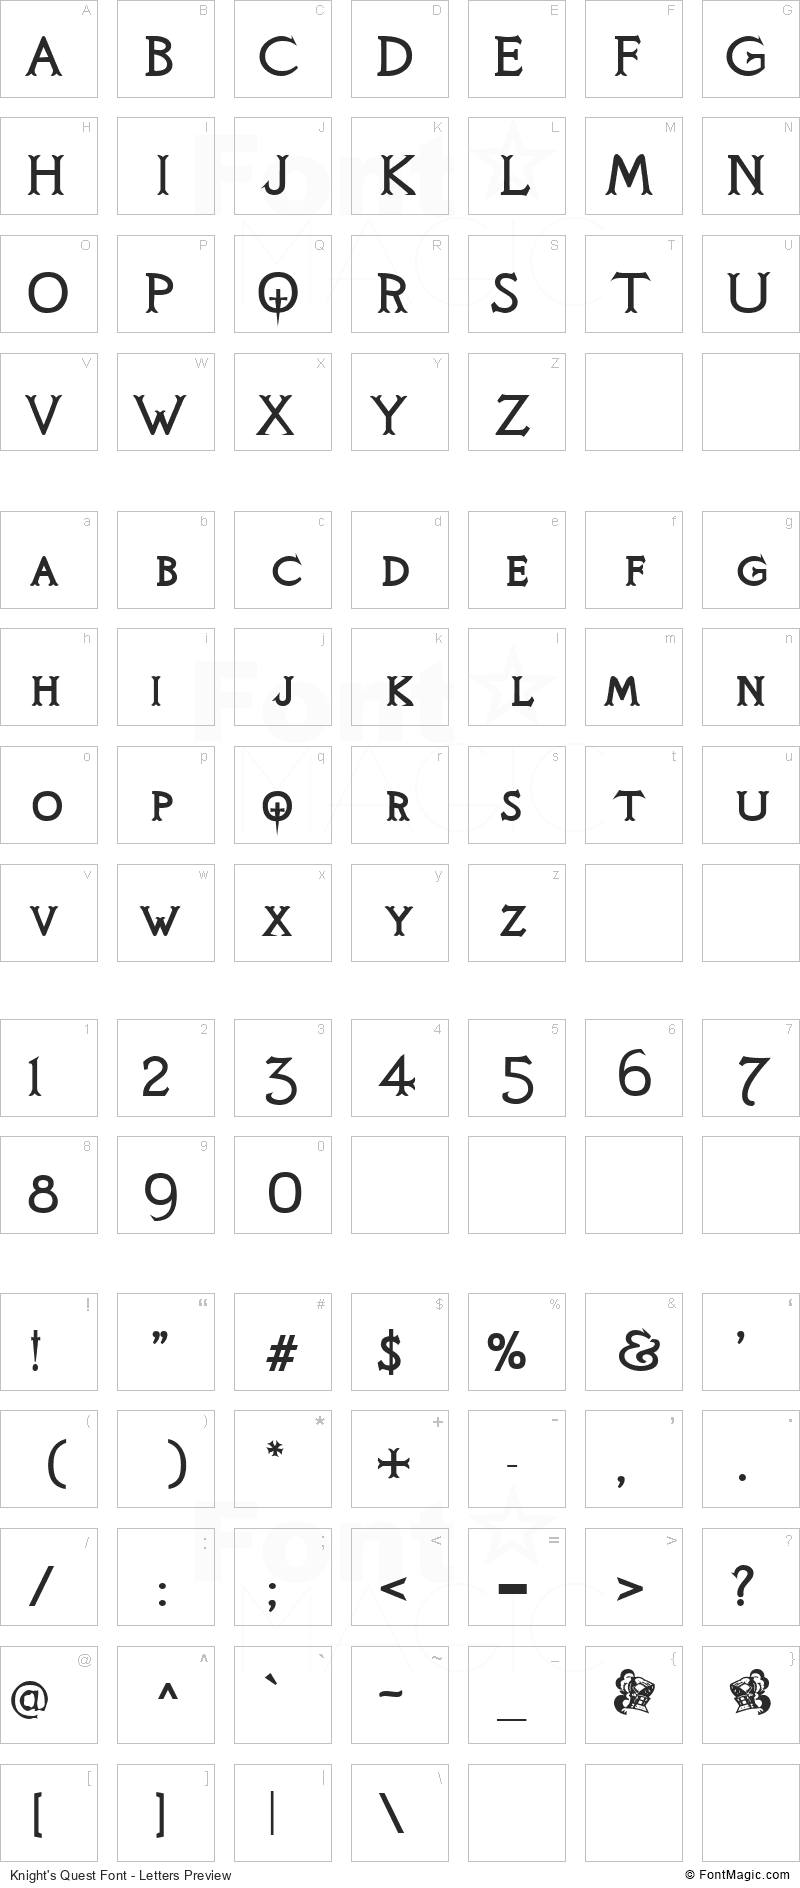 Knight’s Quest Font - All Latters Preview Chart